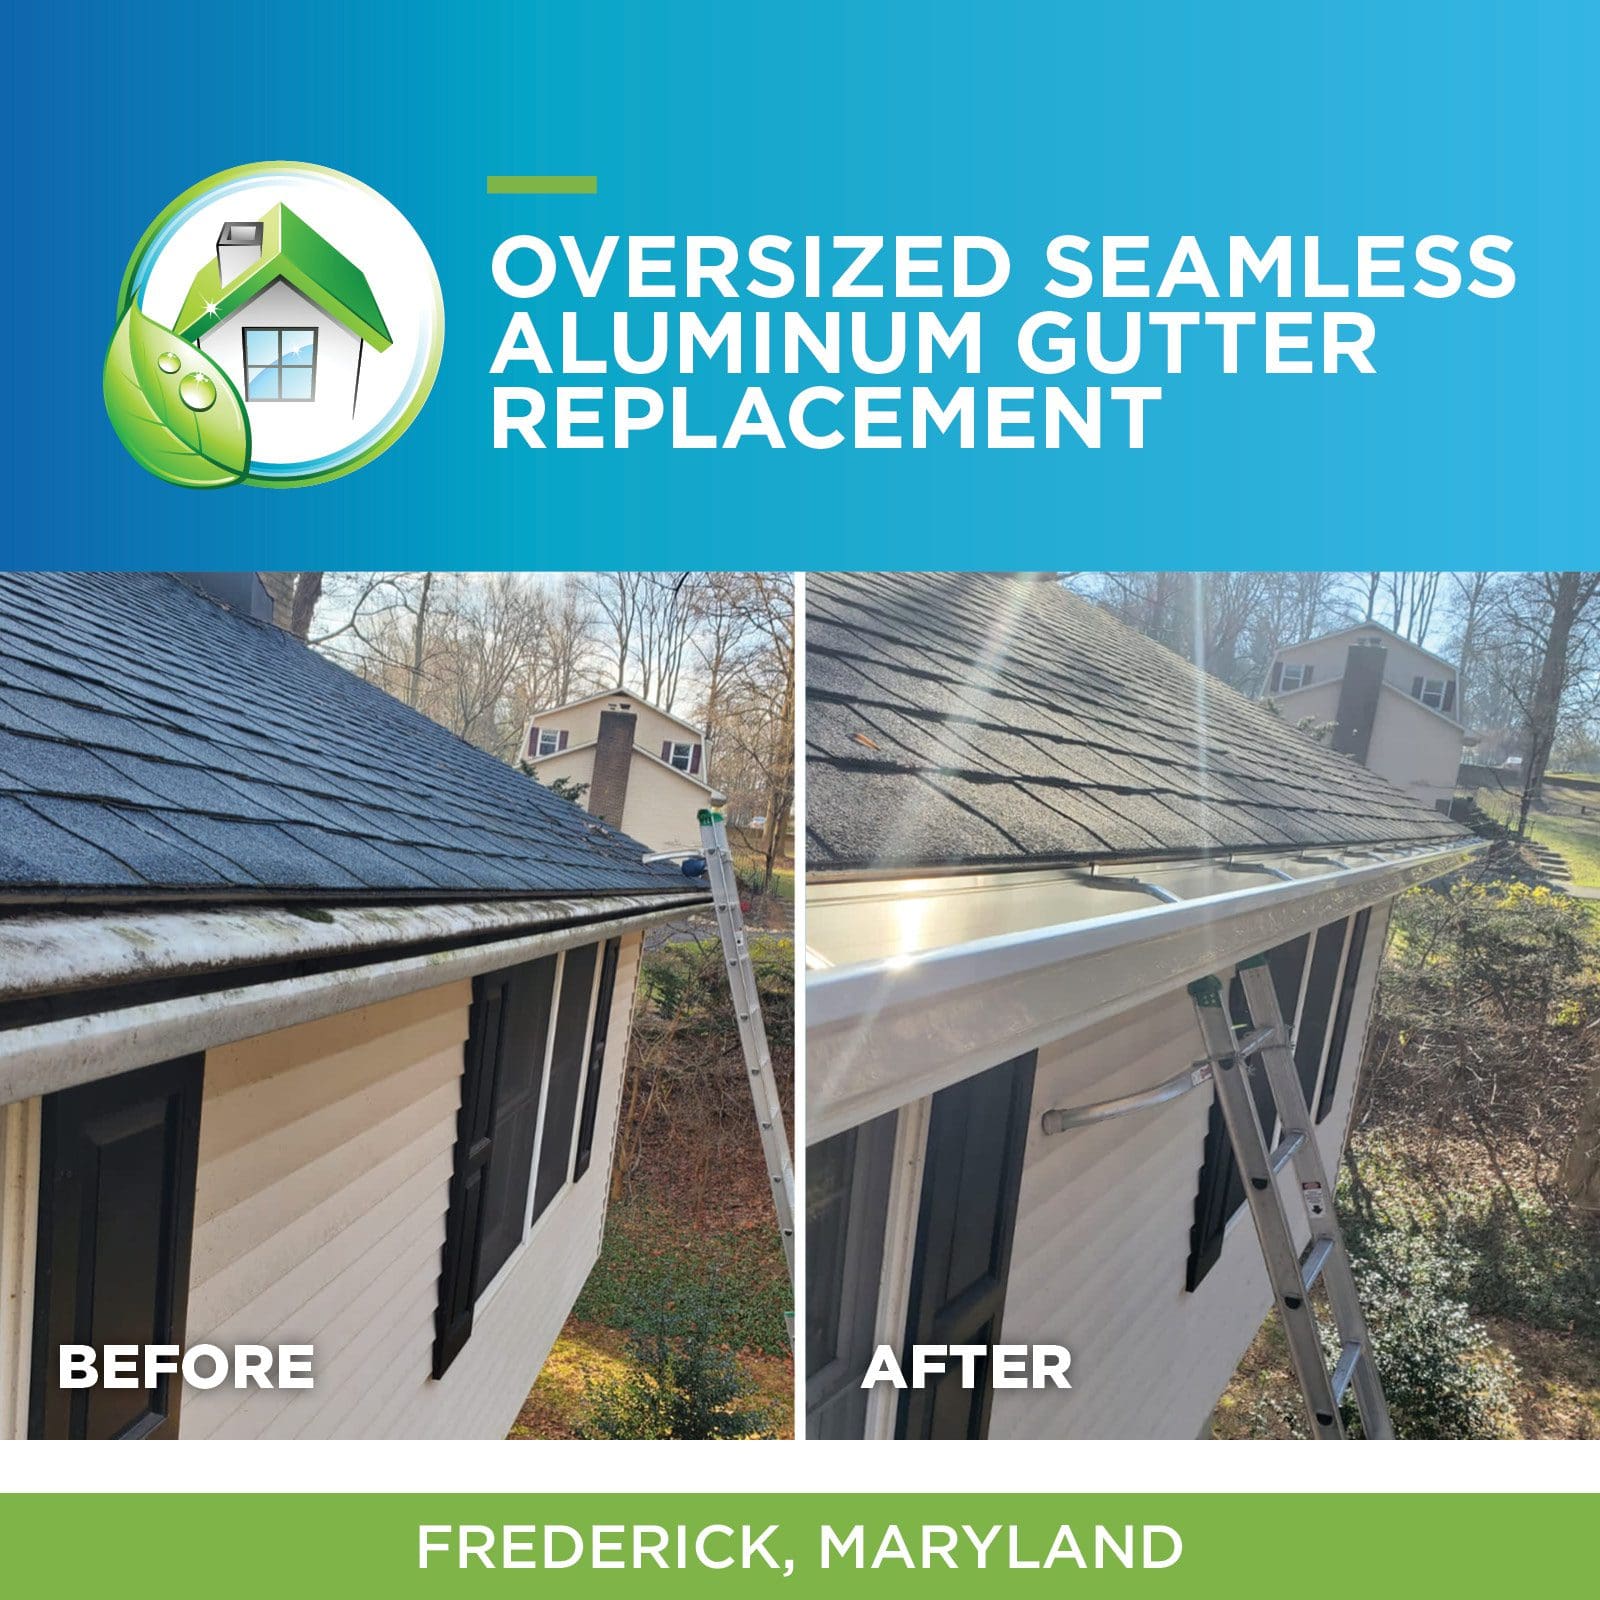 Oversize seamless aluminum gutters with leaf relief gutter guards in Frederick maryland